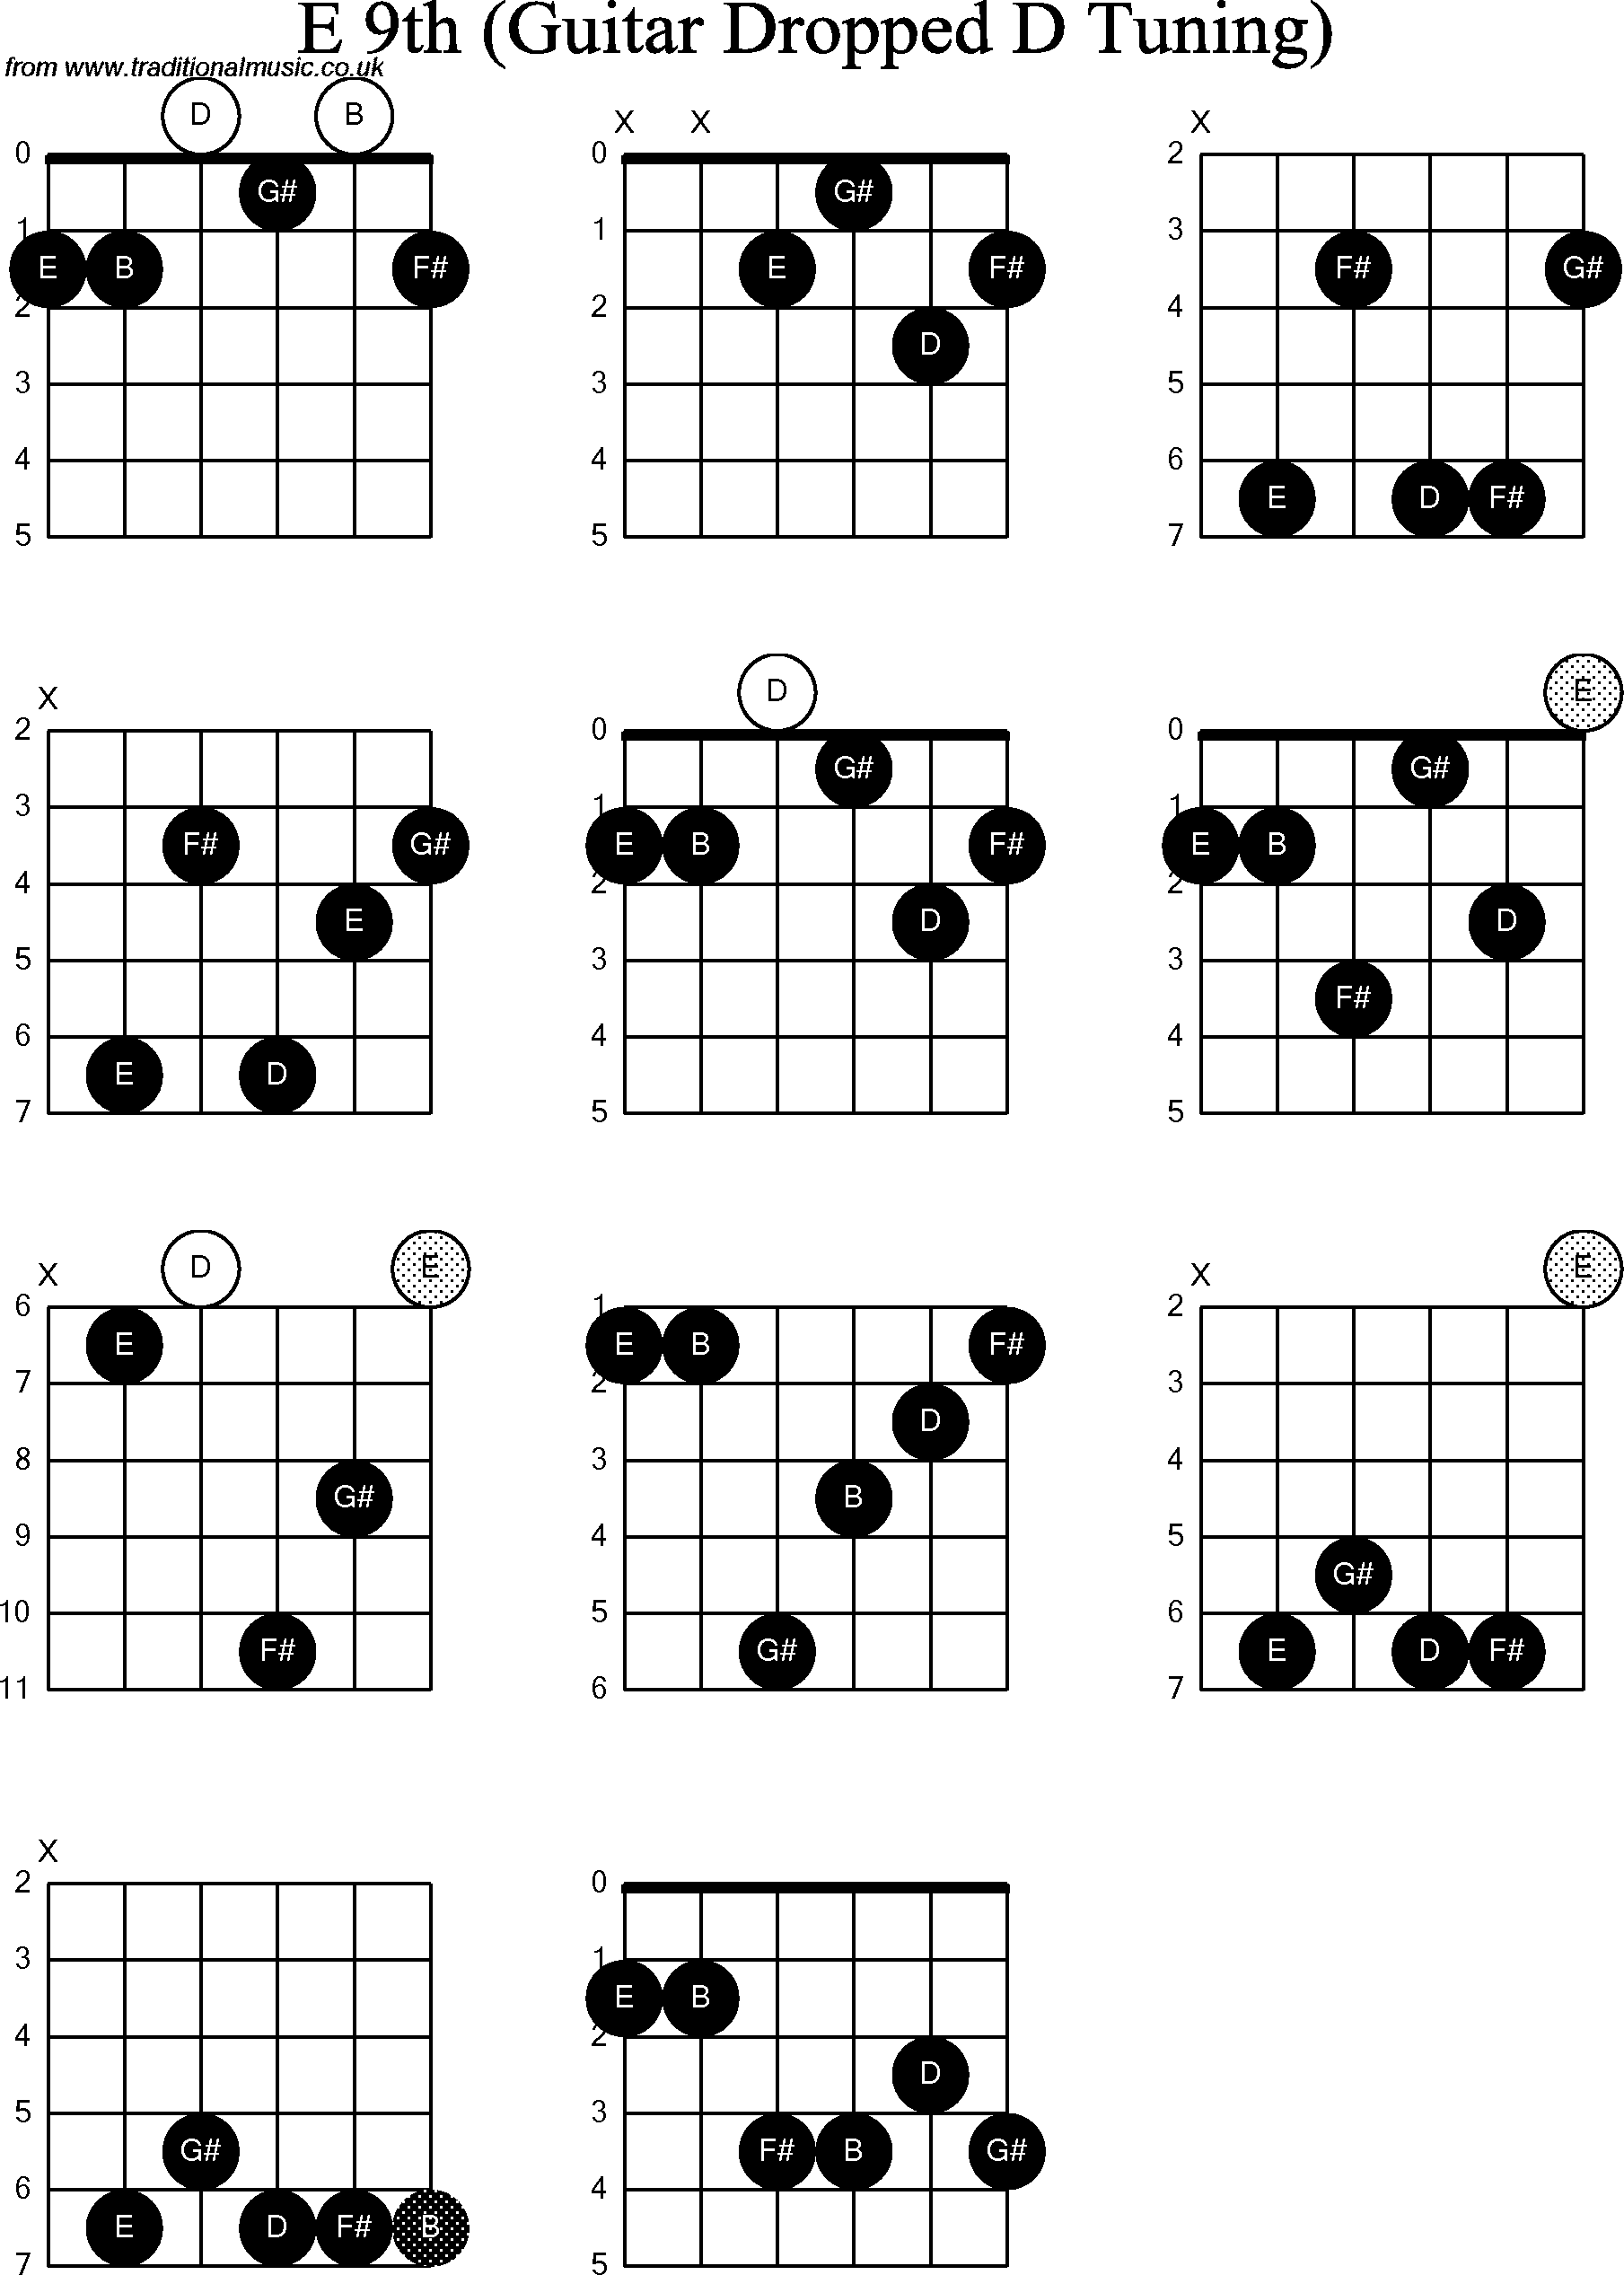 Chord diagrams for dropped D Guitar(DADGBE), E9th